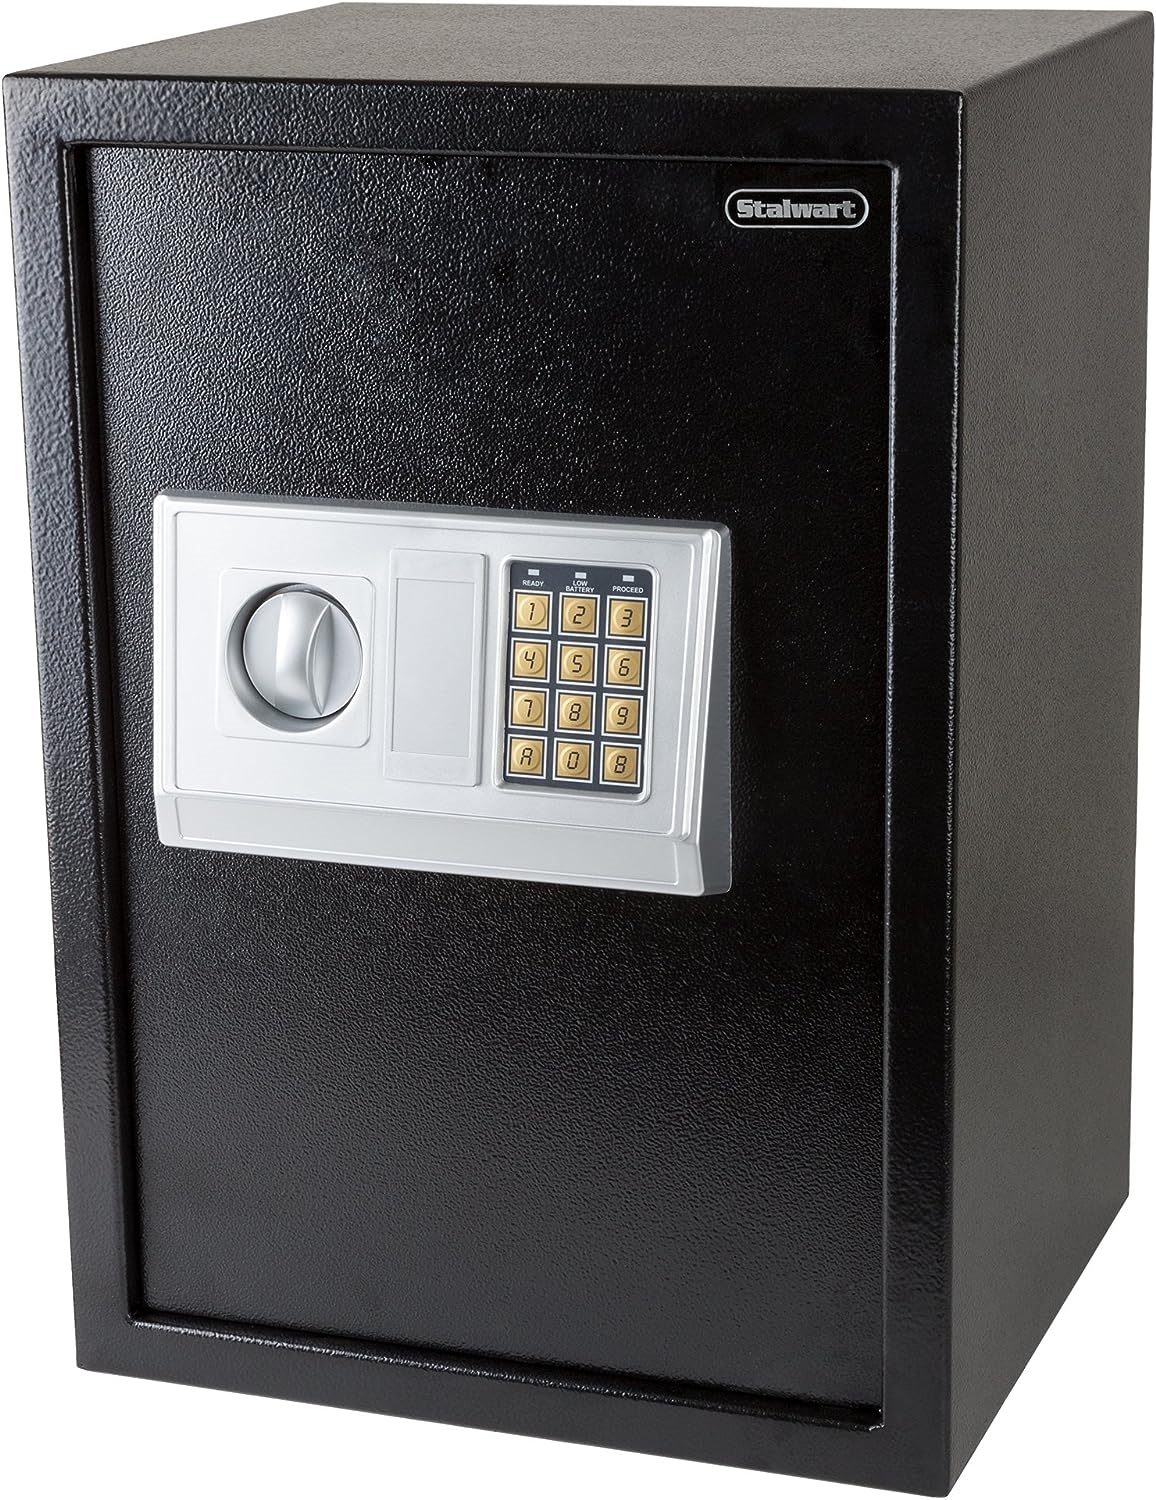 Stalwart Steel Electronic Safe Box | DeviceDaily.com